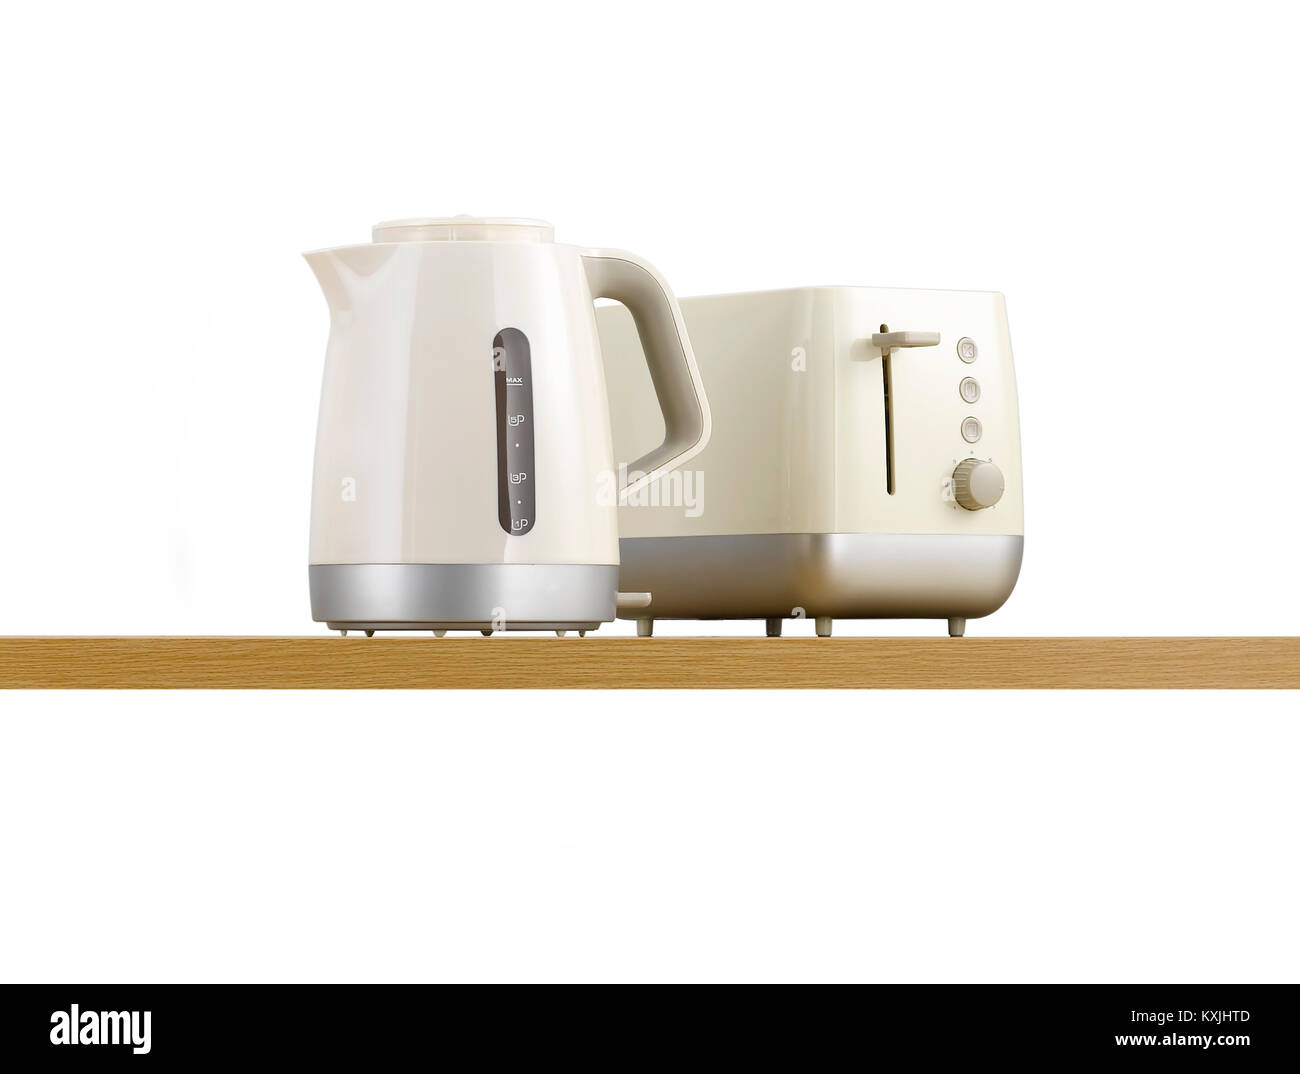 A kettle and toaster on a wooden kitchen shelf Stock Photo